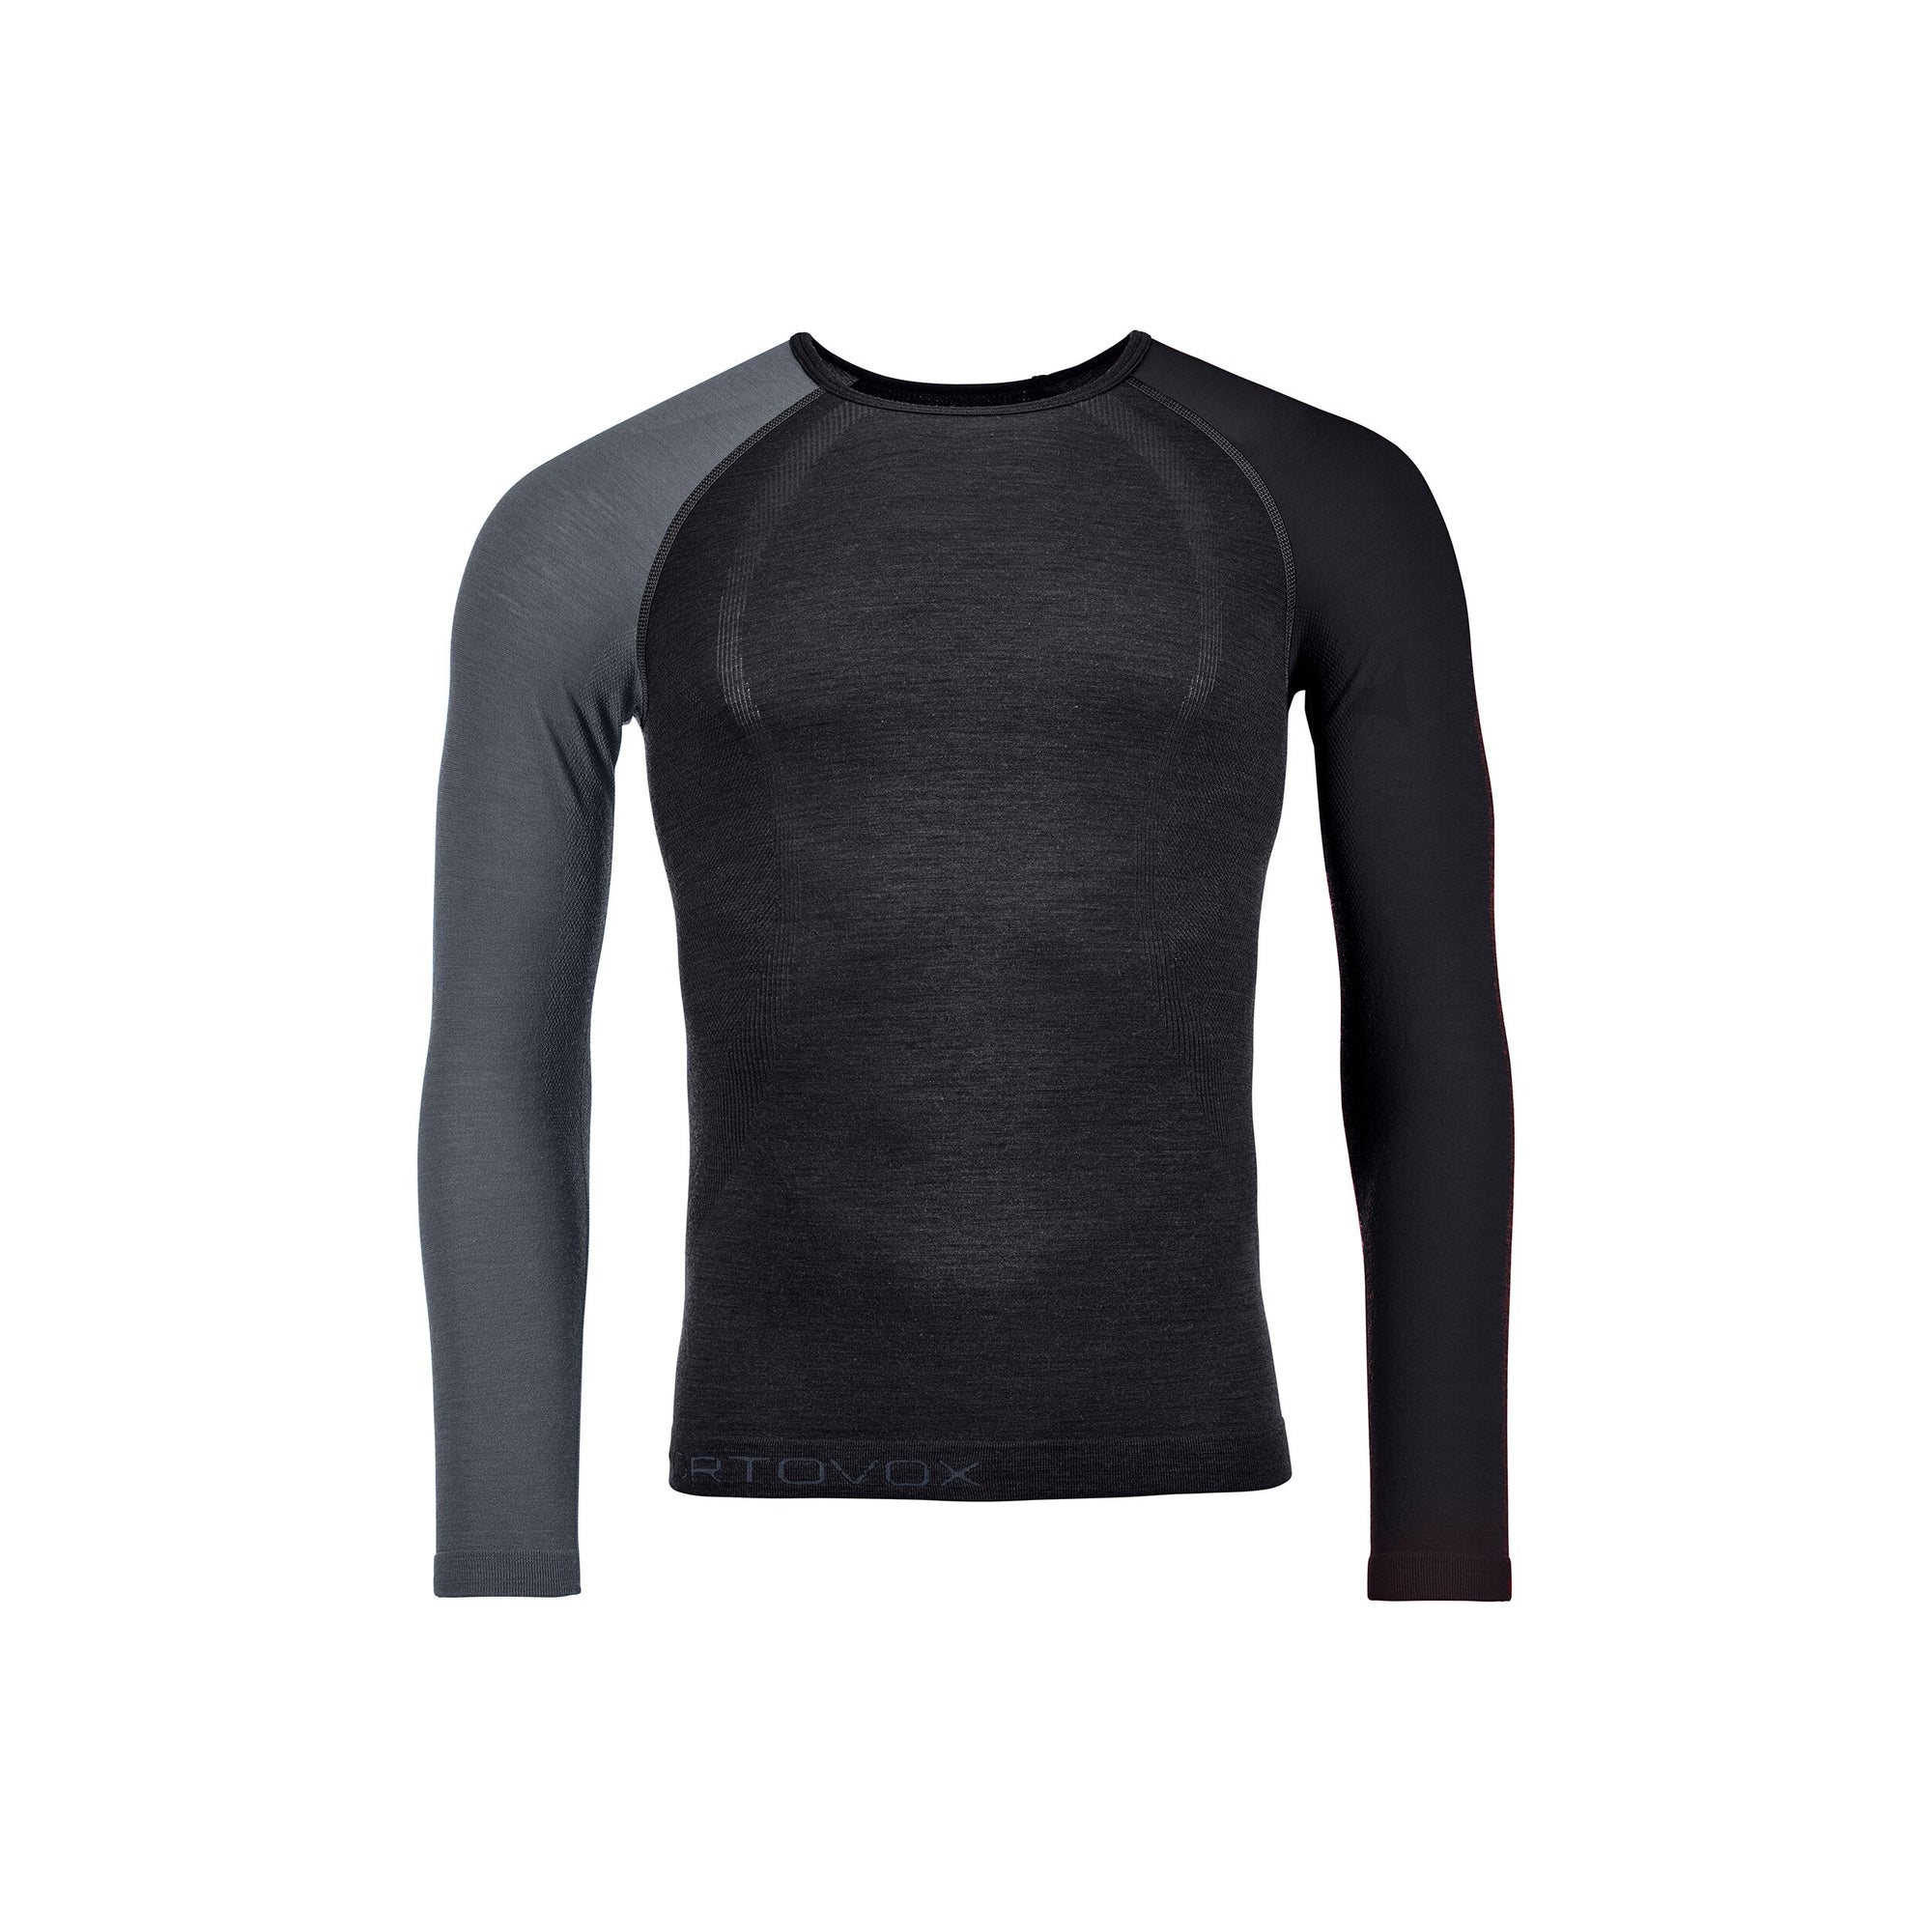 Fdx Thermolinx Men's Thermal Winter Base Layer Top Blue